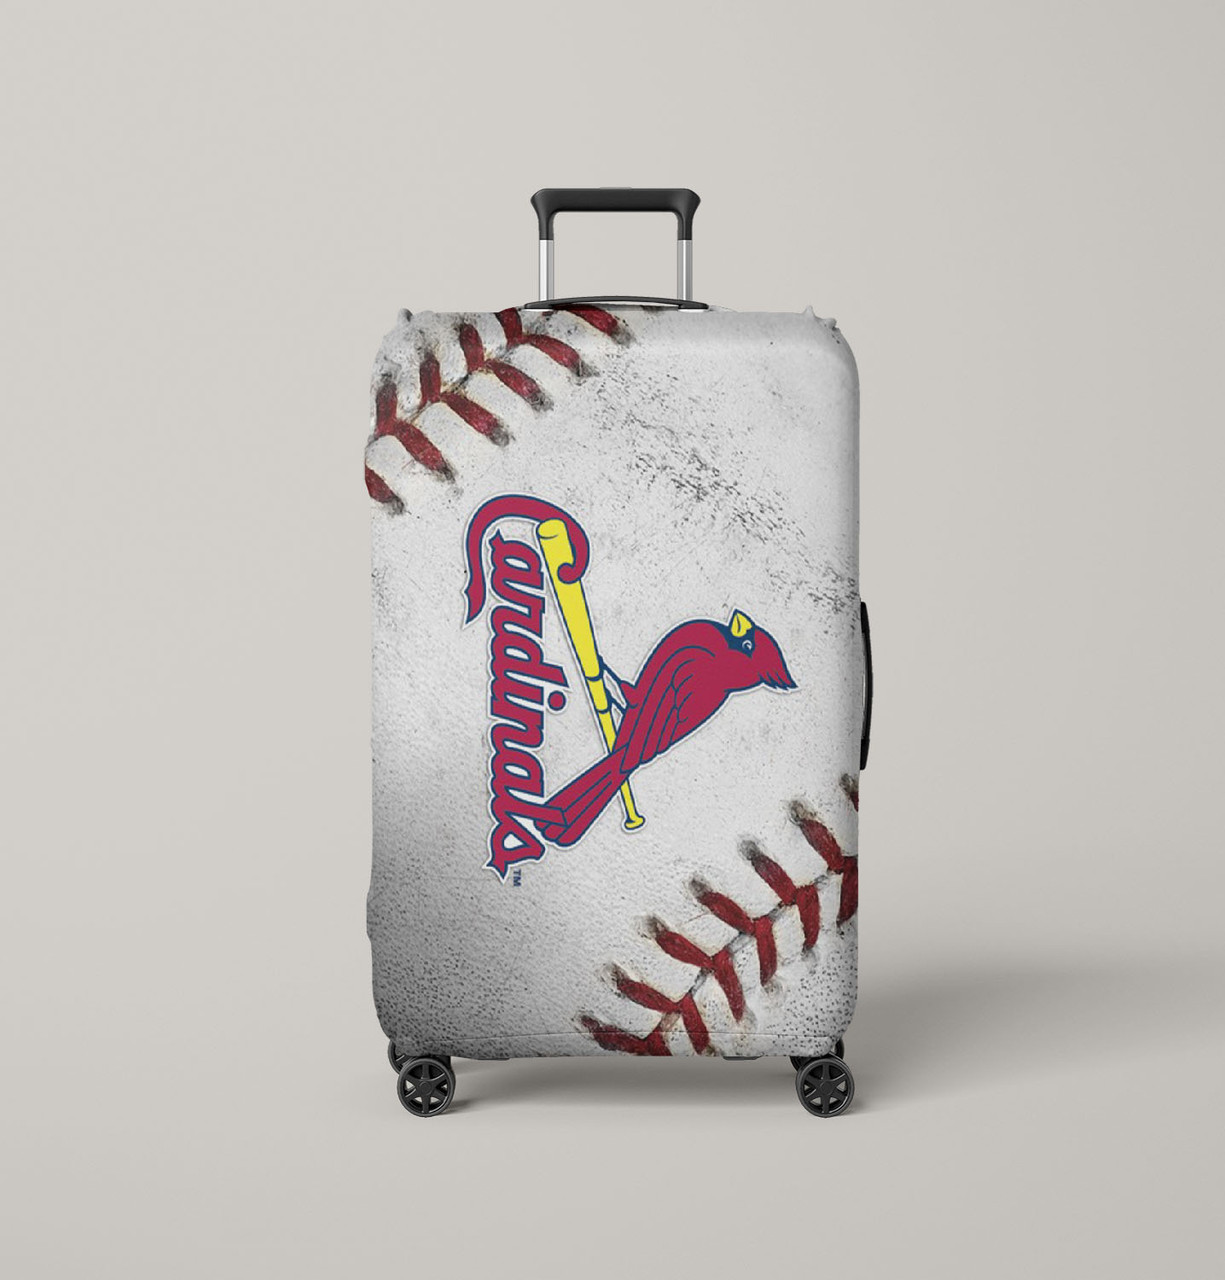 st louis cardinals ball bkg Luggage Cover - Coverszy